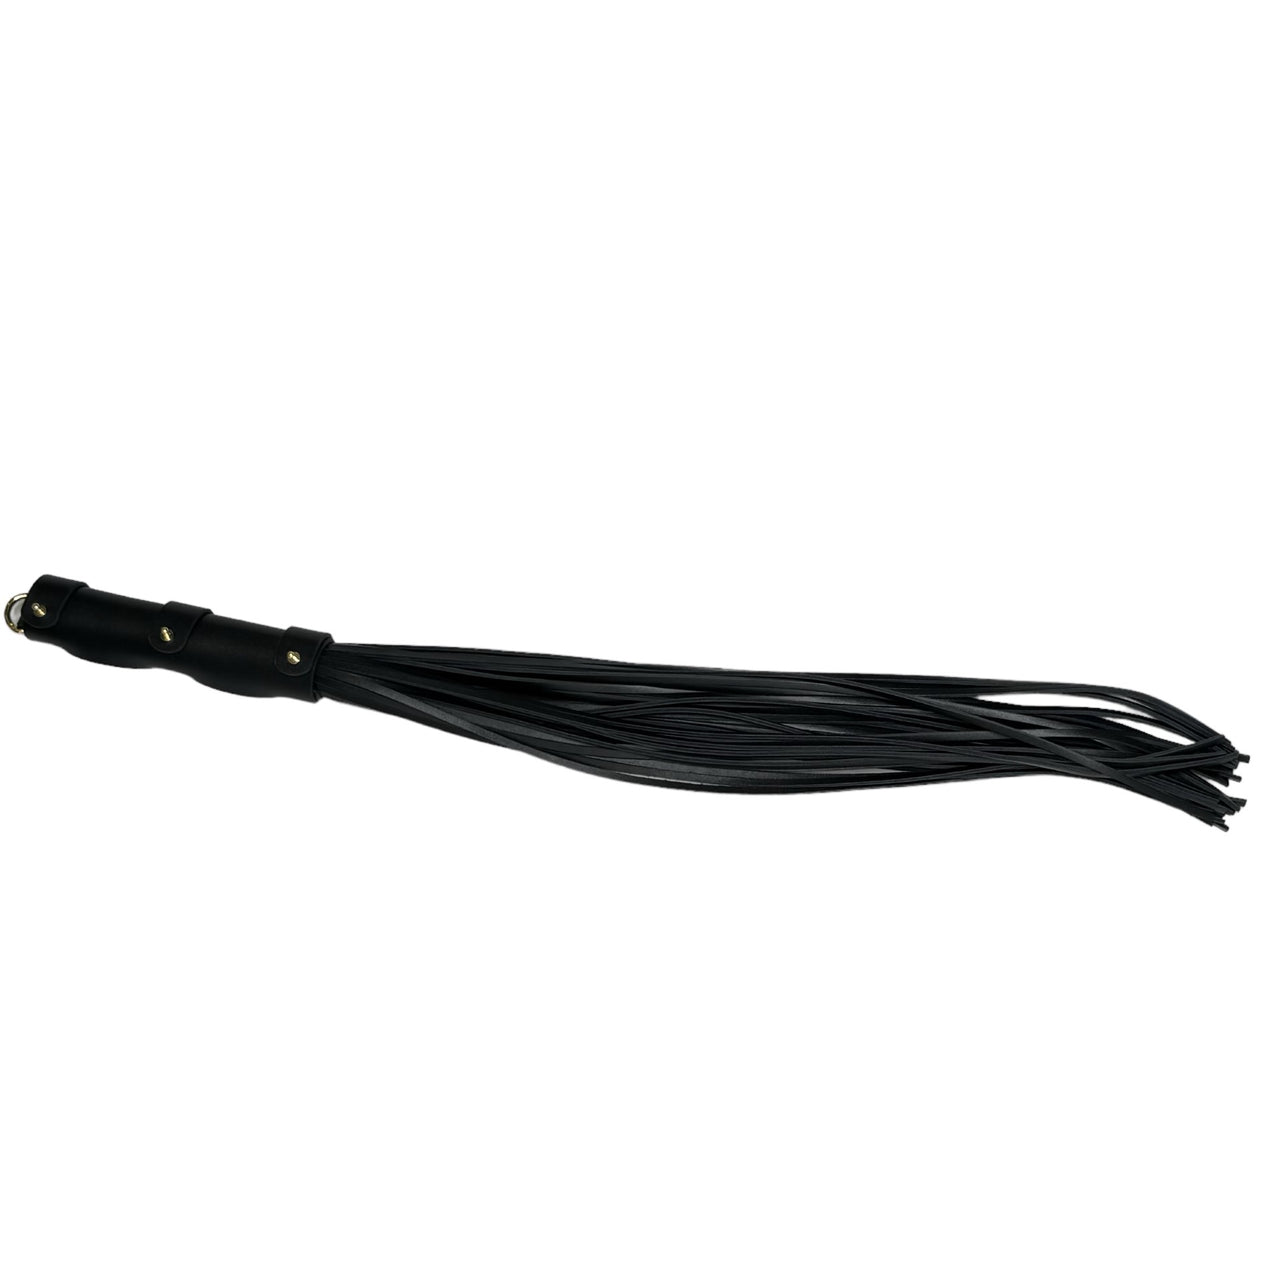 Serious Heavy Duty Leather Braided Flogger Whip with Extended Tassels & Rolled Handle Premium Sensory Play Accessory for Couples